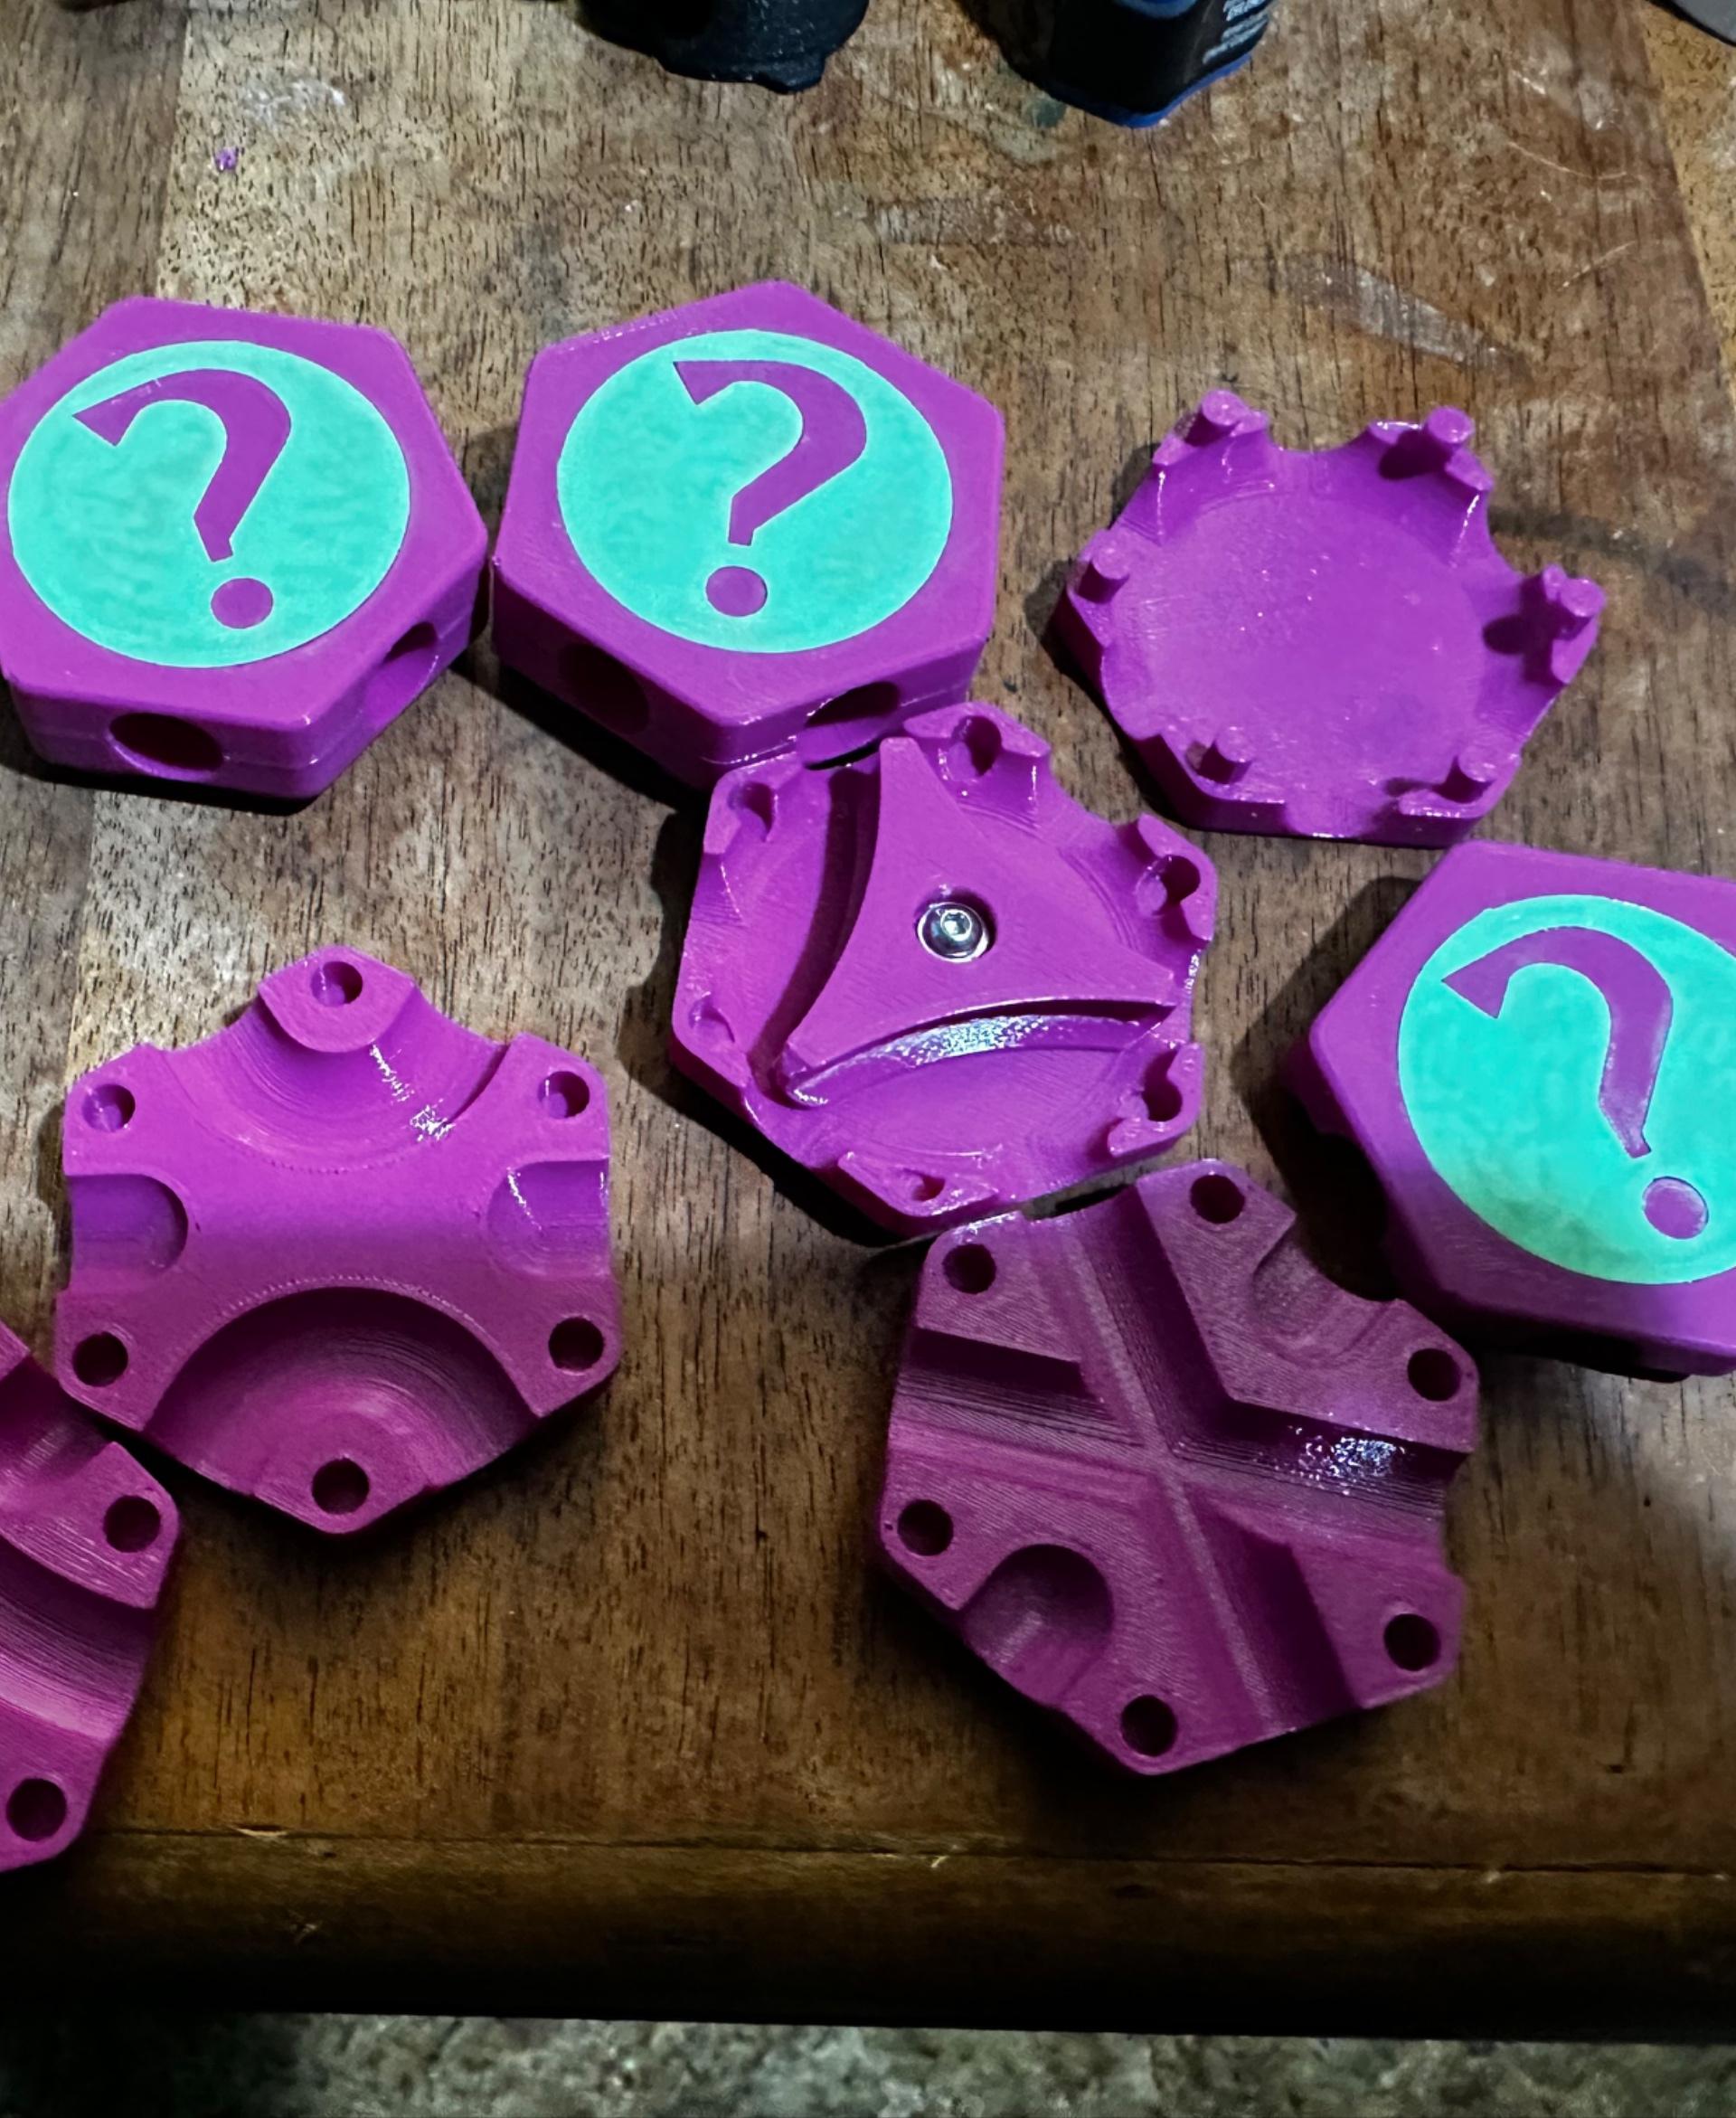 Hextraction Secret Tiles - These were kind of a pain to print.  Thankfully I read through the comments and makes first and learned that the I need to get corrected tile bodies - the X, DC and Flipper tiles all have holes that are too shallow for the cover so I used these corrected models:

DC, X - https://thangs.com/designer/johnlattanzio98/3d-model/FIXED%20Secret%20Hextraction%20Tiles-878686

Flipper - https://thangs.com/designer/timothyjackman/3d-model/Fixed%20Hextraction%20Secret%20Flipper%20Tile-884171

For the cover - I printed them with the "top" (the question mark) down, and used supports.  Then, I shrunk the inlay down to .4mm thick instead of .6mm, that way they fit in nicely when I glued them in.  Looking forward to getting my MMU3 unit so I can reprint these in multicolor without gluing the inlays in. - 3d model